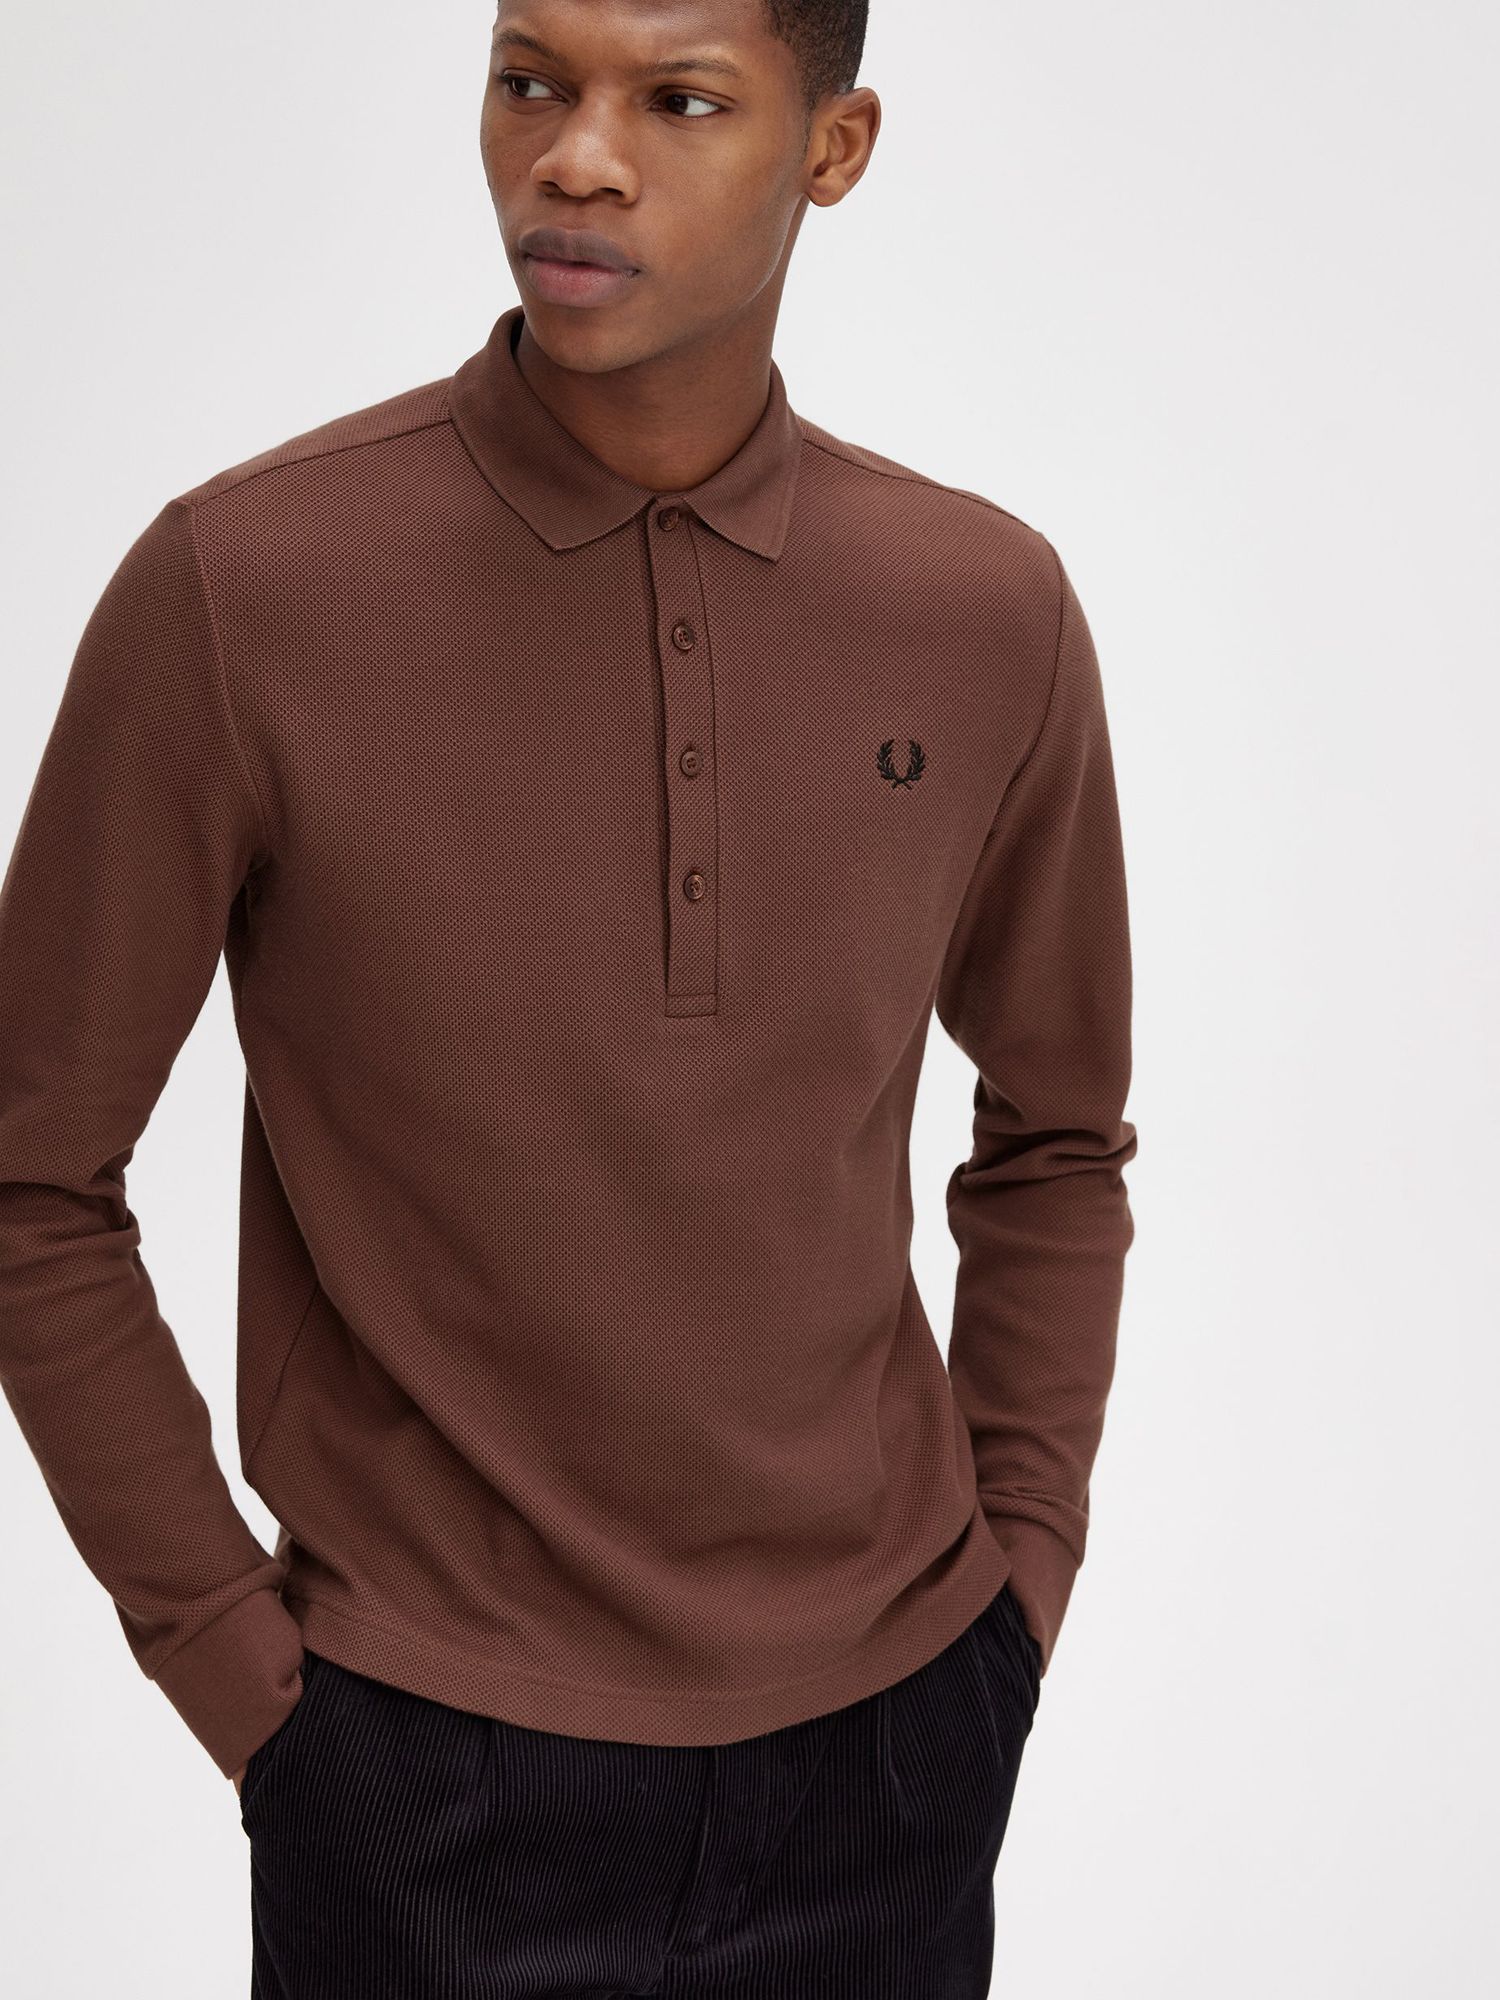 Fred Perry Long Sleeve Cotton Polo Shirt, Whiskey Brown, XL